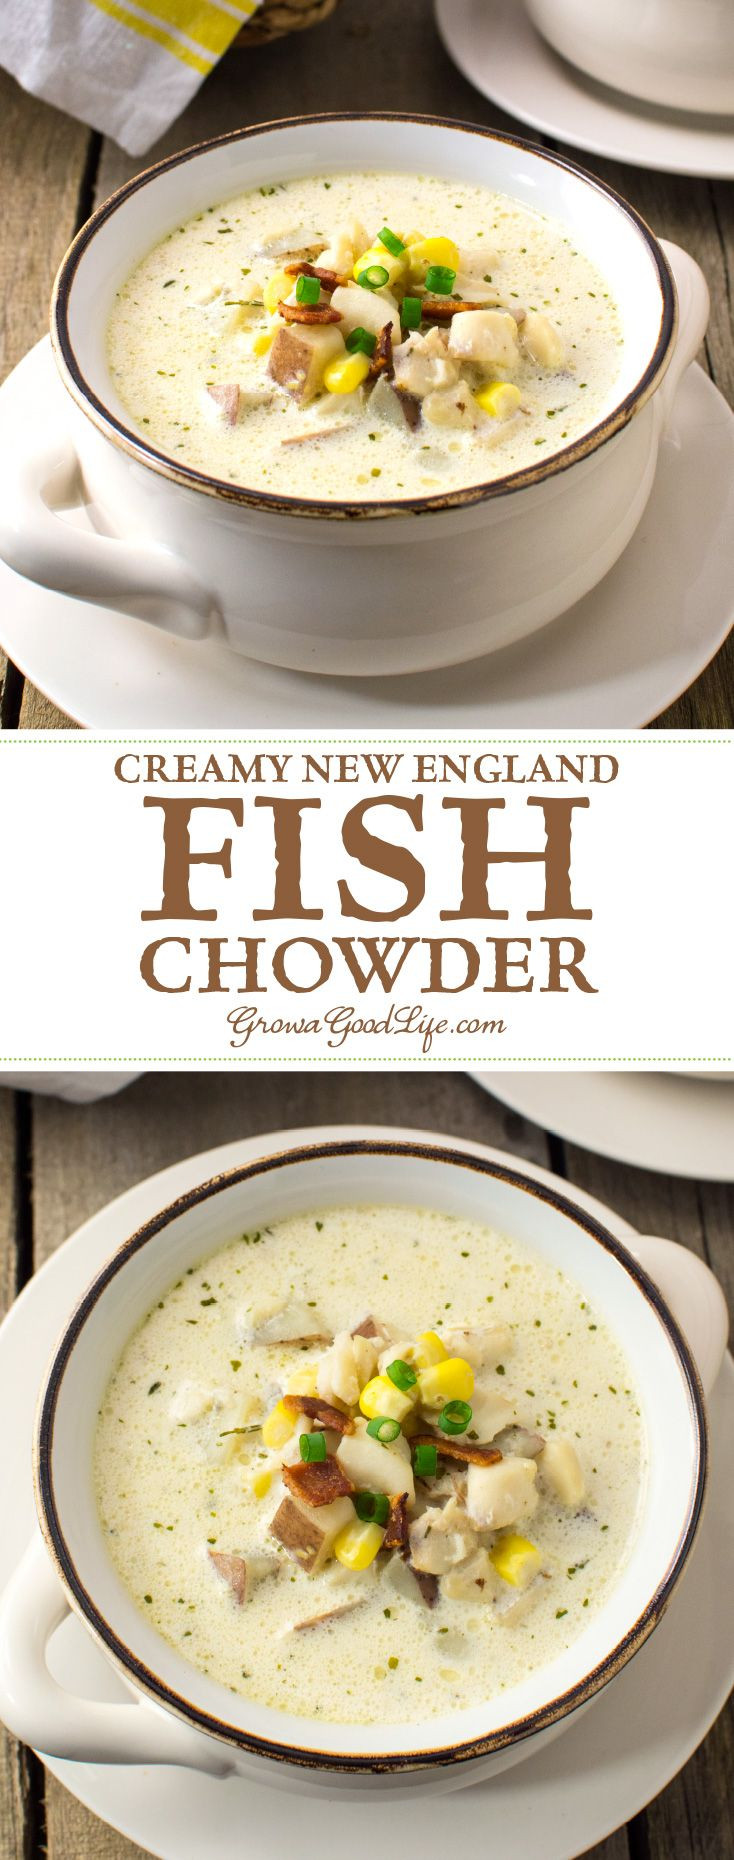 25 Of the Best Ideas for Maine Fish Chowder - Best Recipes Ideas and ...